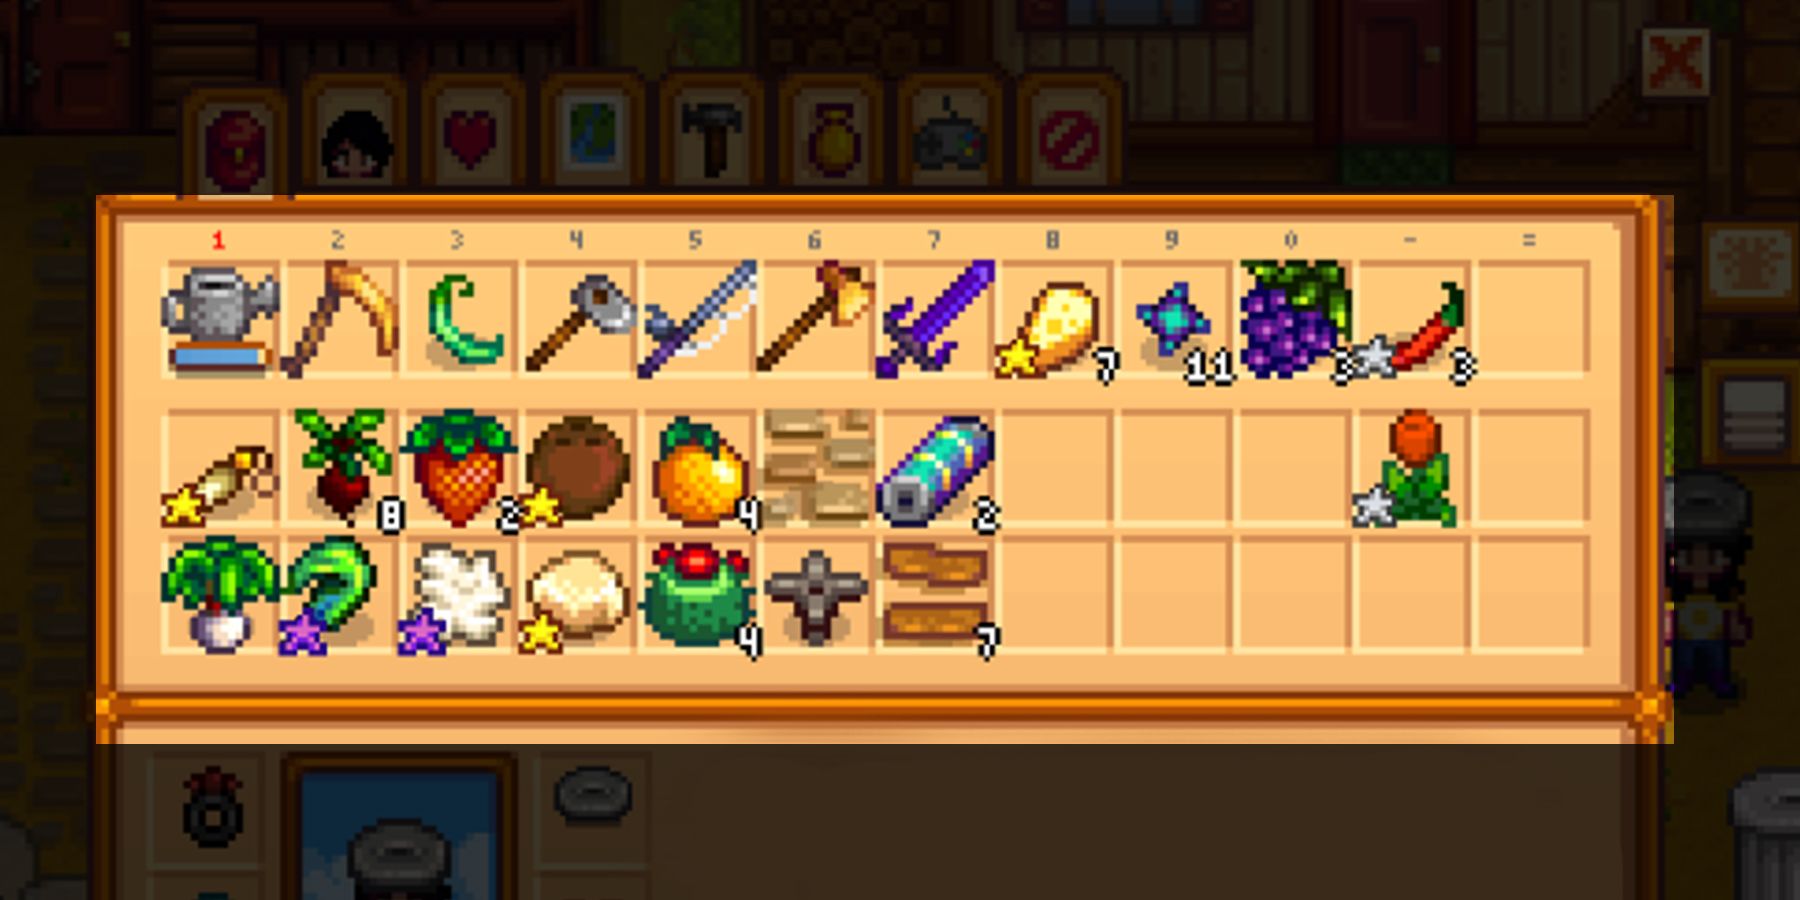 The Inventory in Stardew Valley